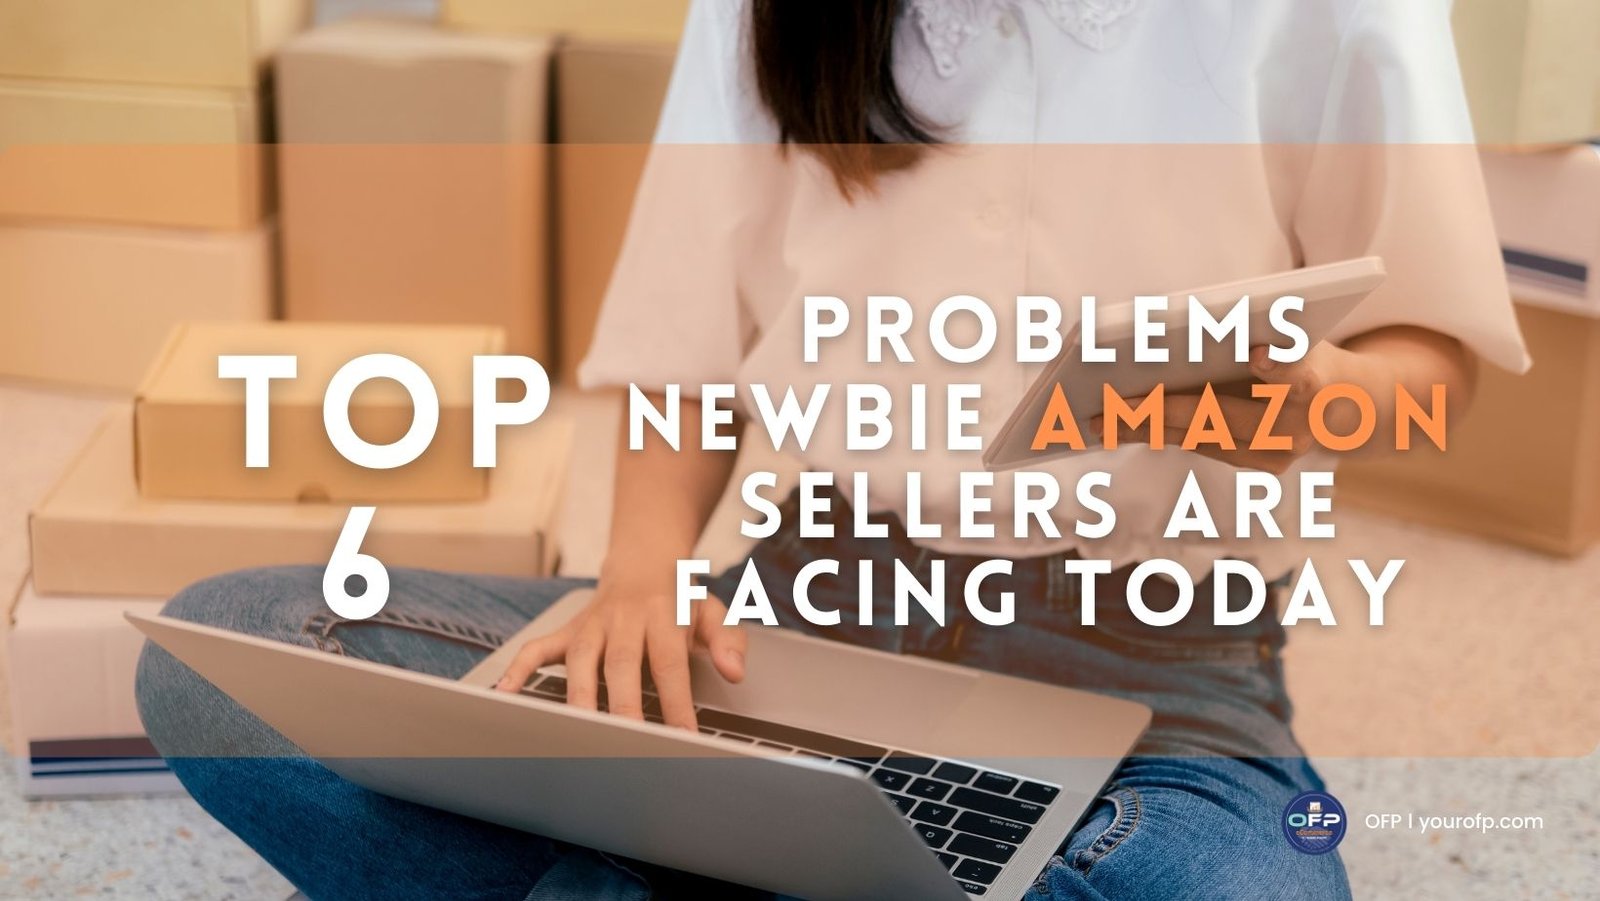 Top 6 Problems Newbie Amazon Sellers Are Facing Today